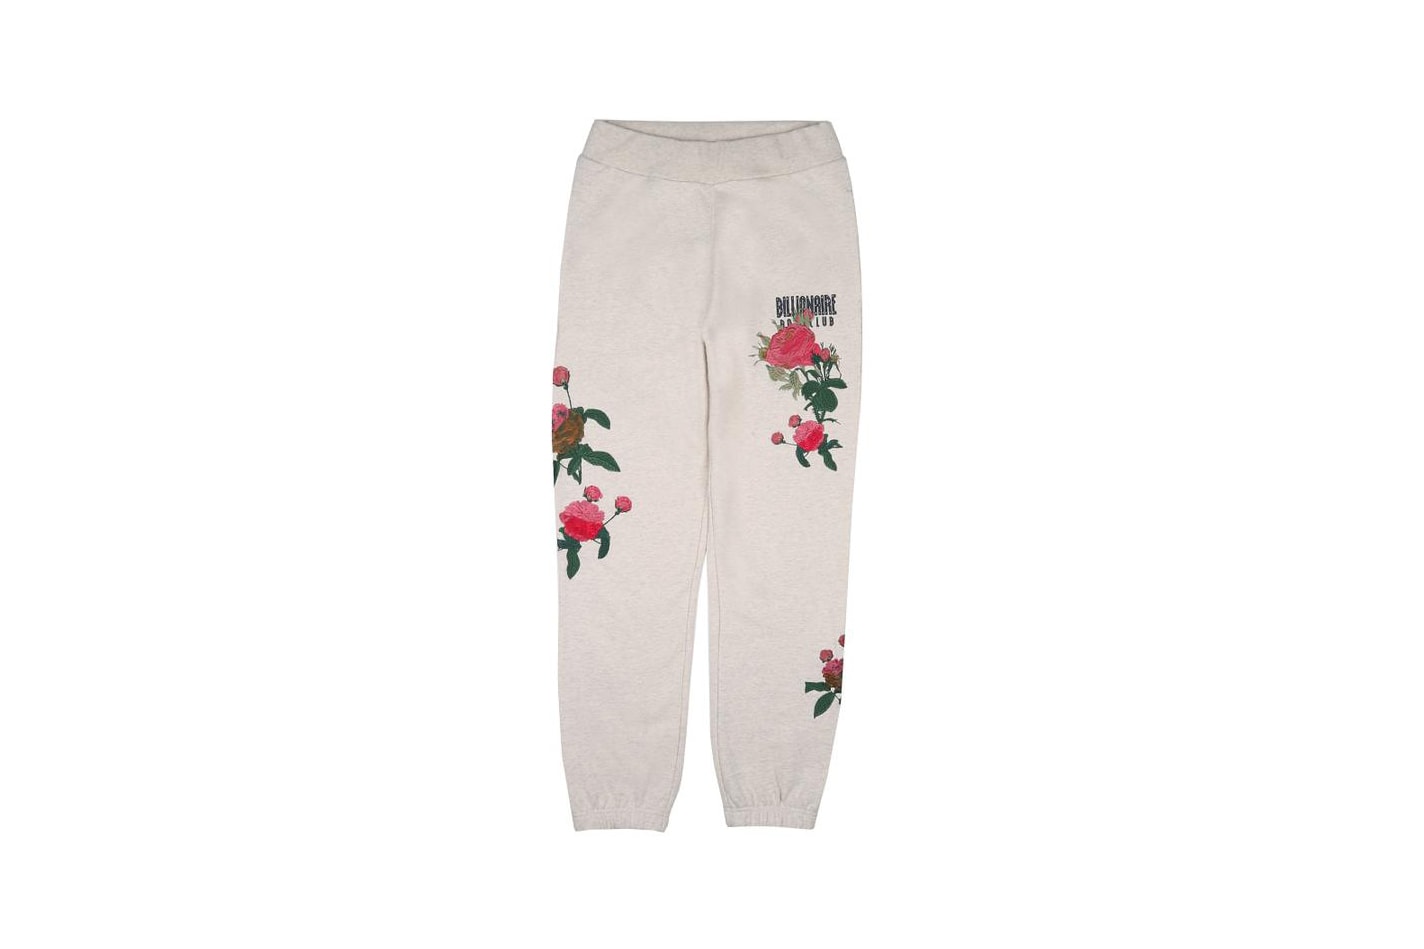 Billionaire Boys Club Spring 2018 Embroidered Floral Sweatpants Oat Marl